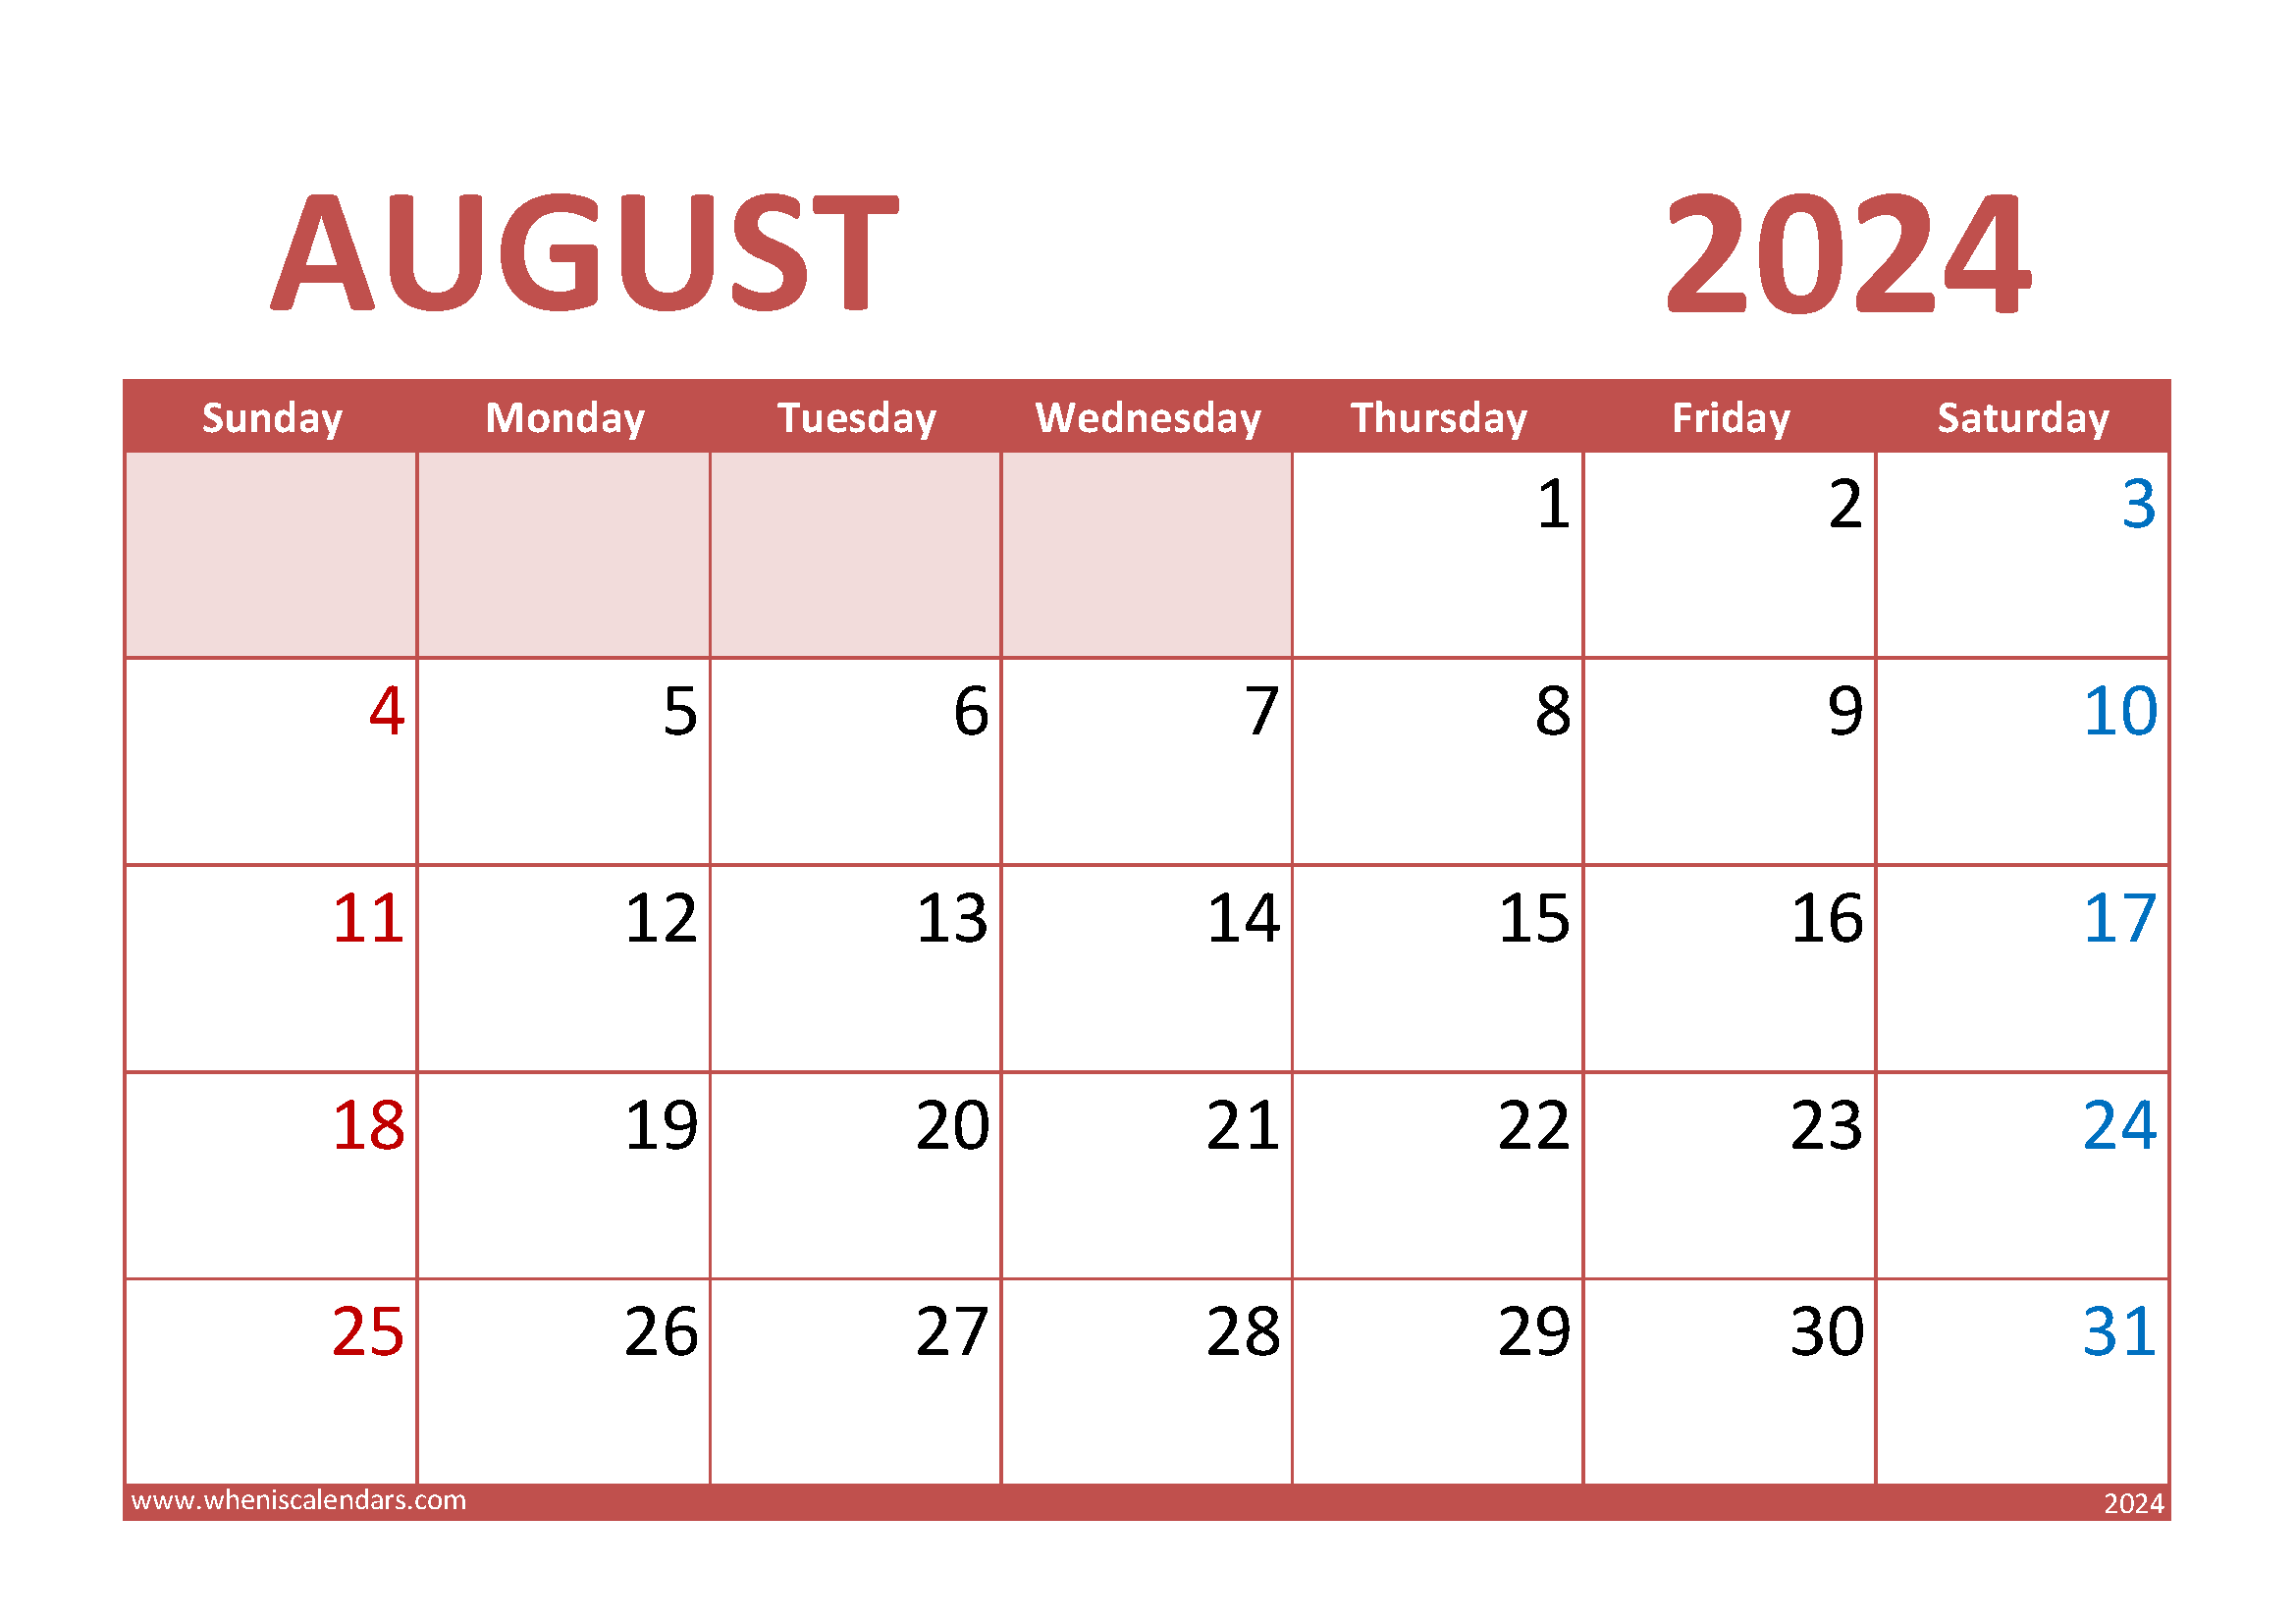 Special Days in August 2024